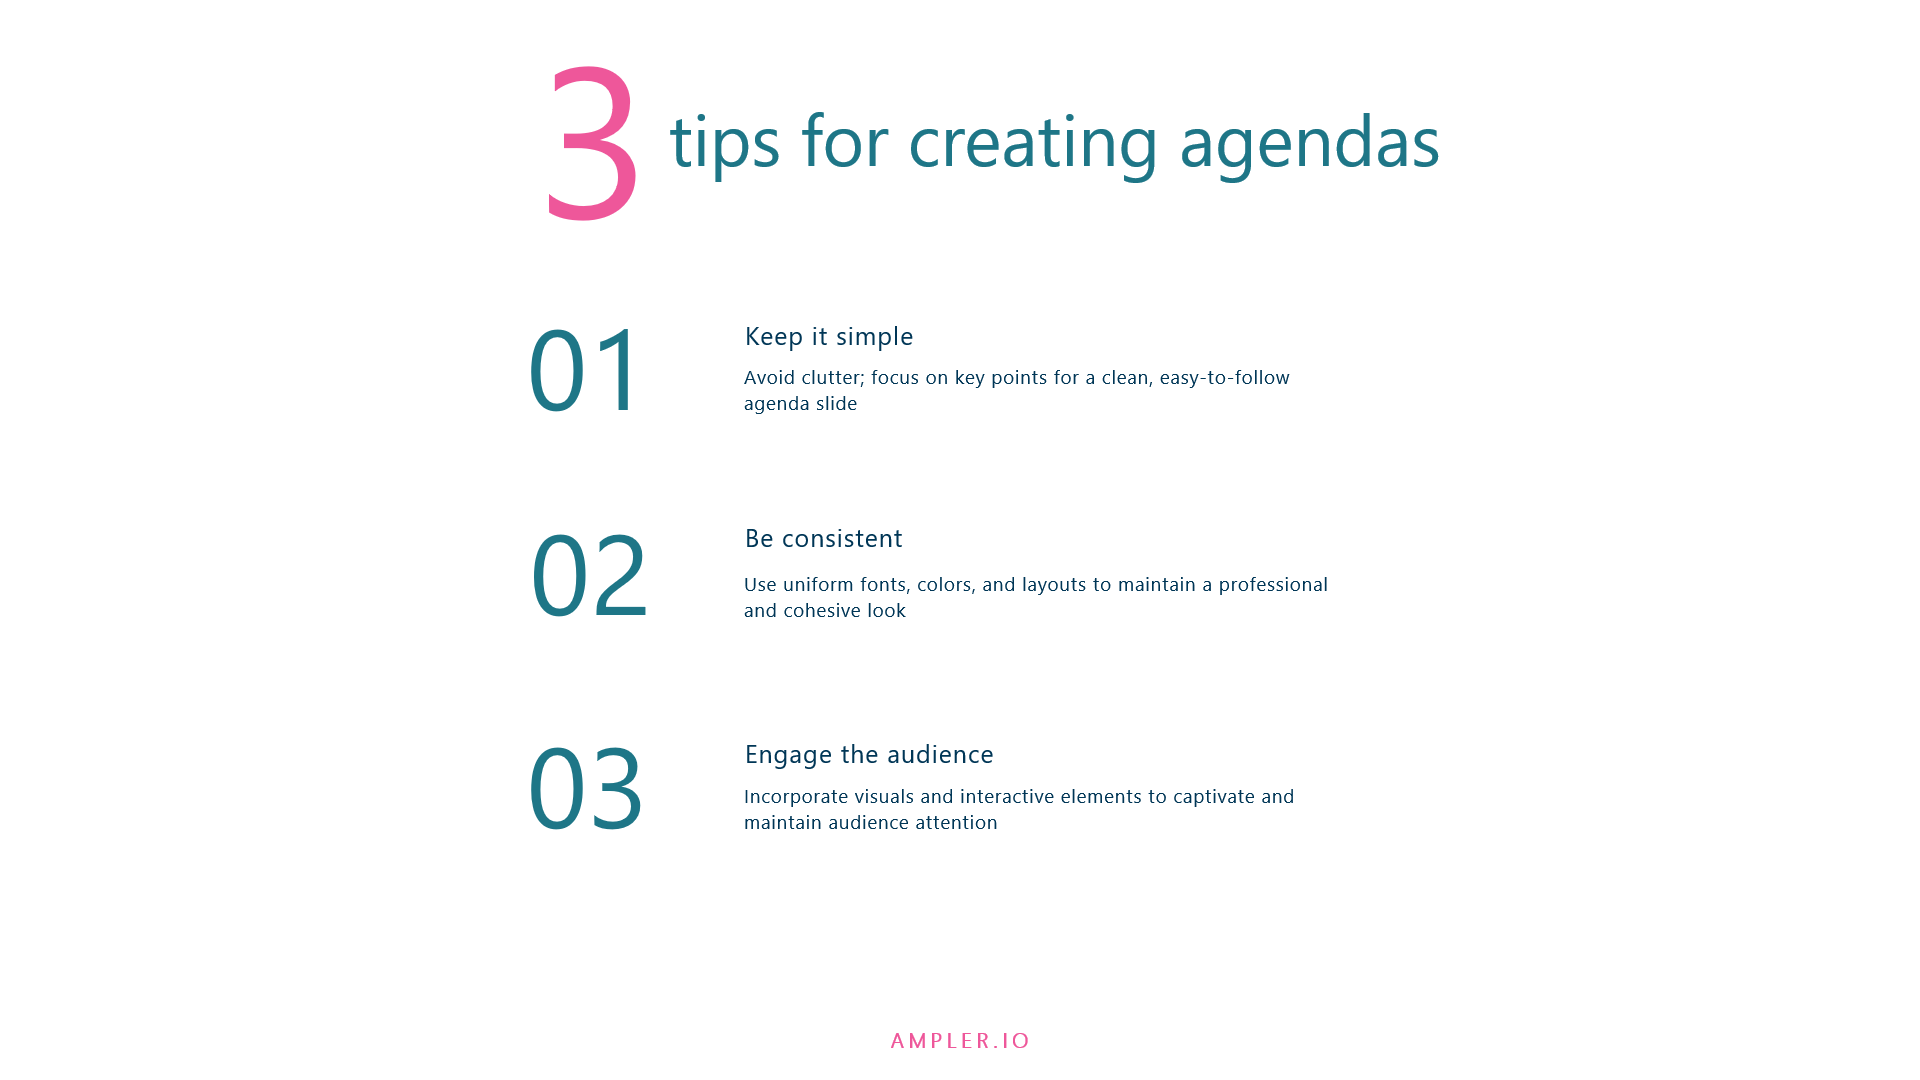 Three tips for creating agendas, whether you're using PowerPoint templates or have built your own template.